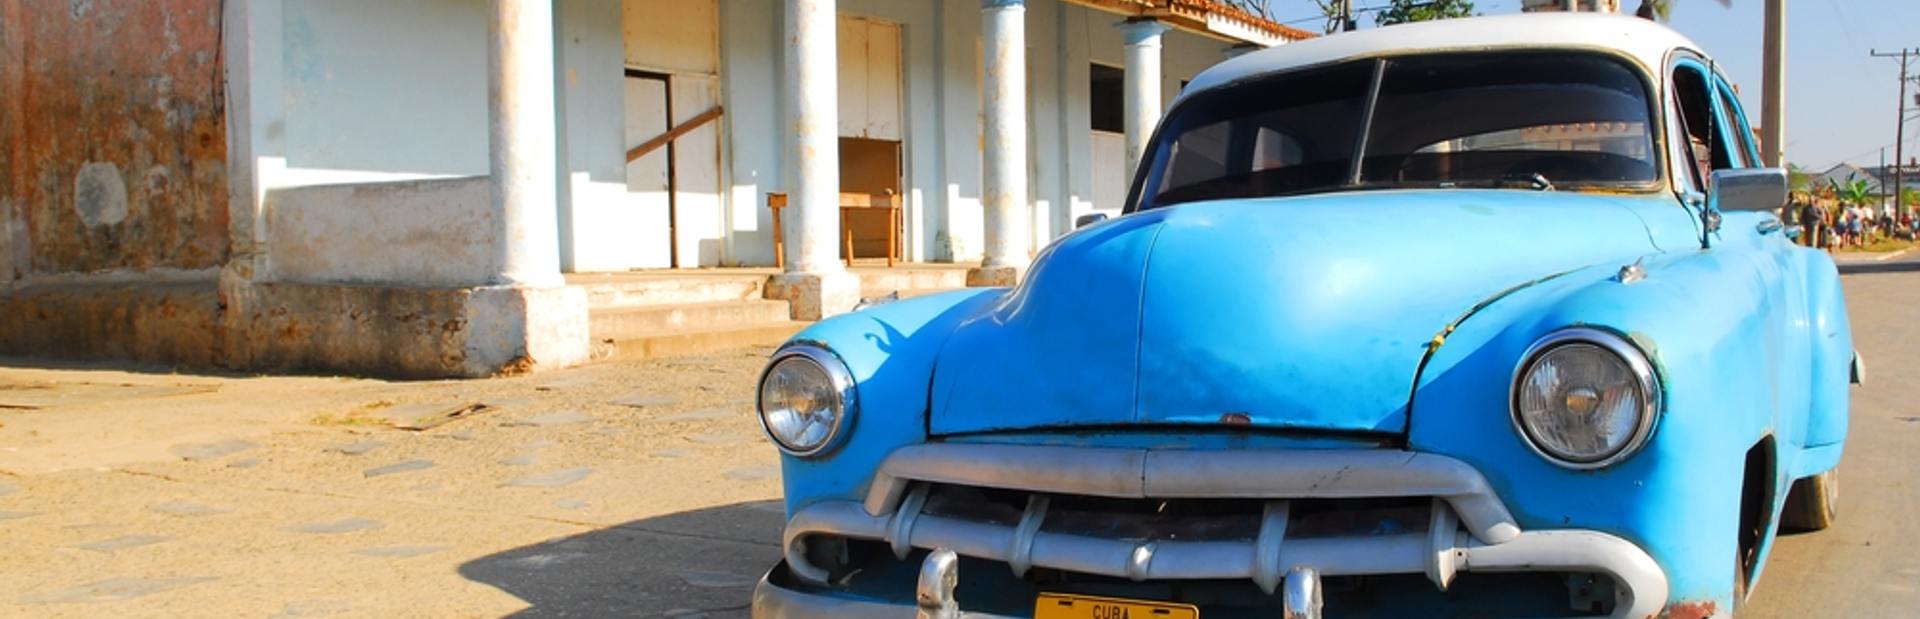 Classic blue car on the road to Vinales